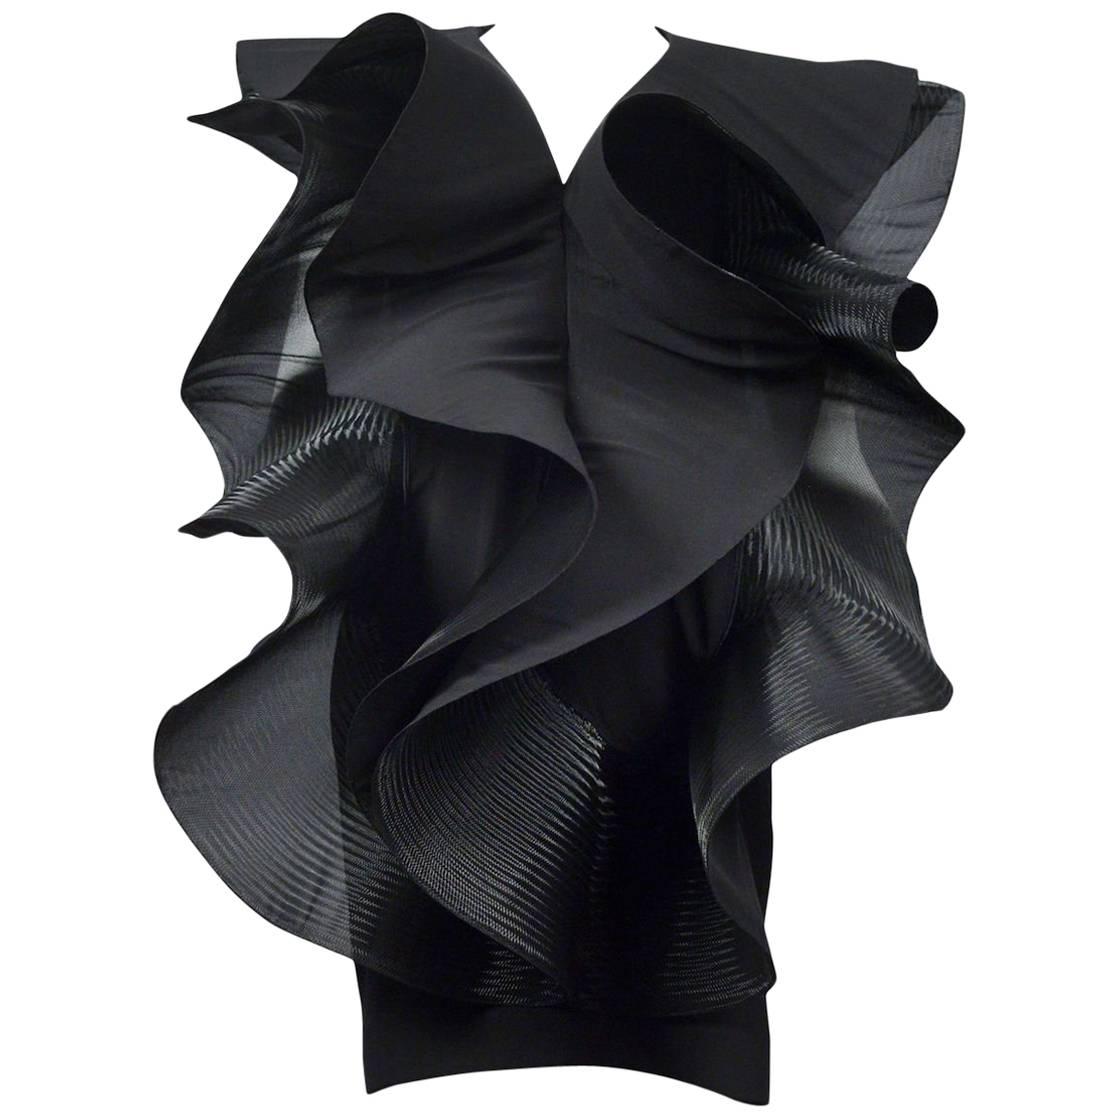 Pierre Cardin Couture Architectural Ruffle Dress